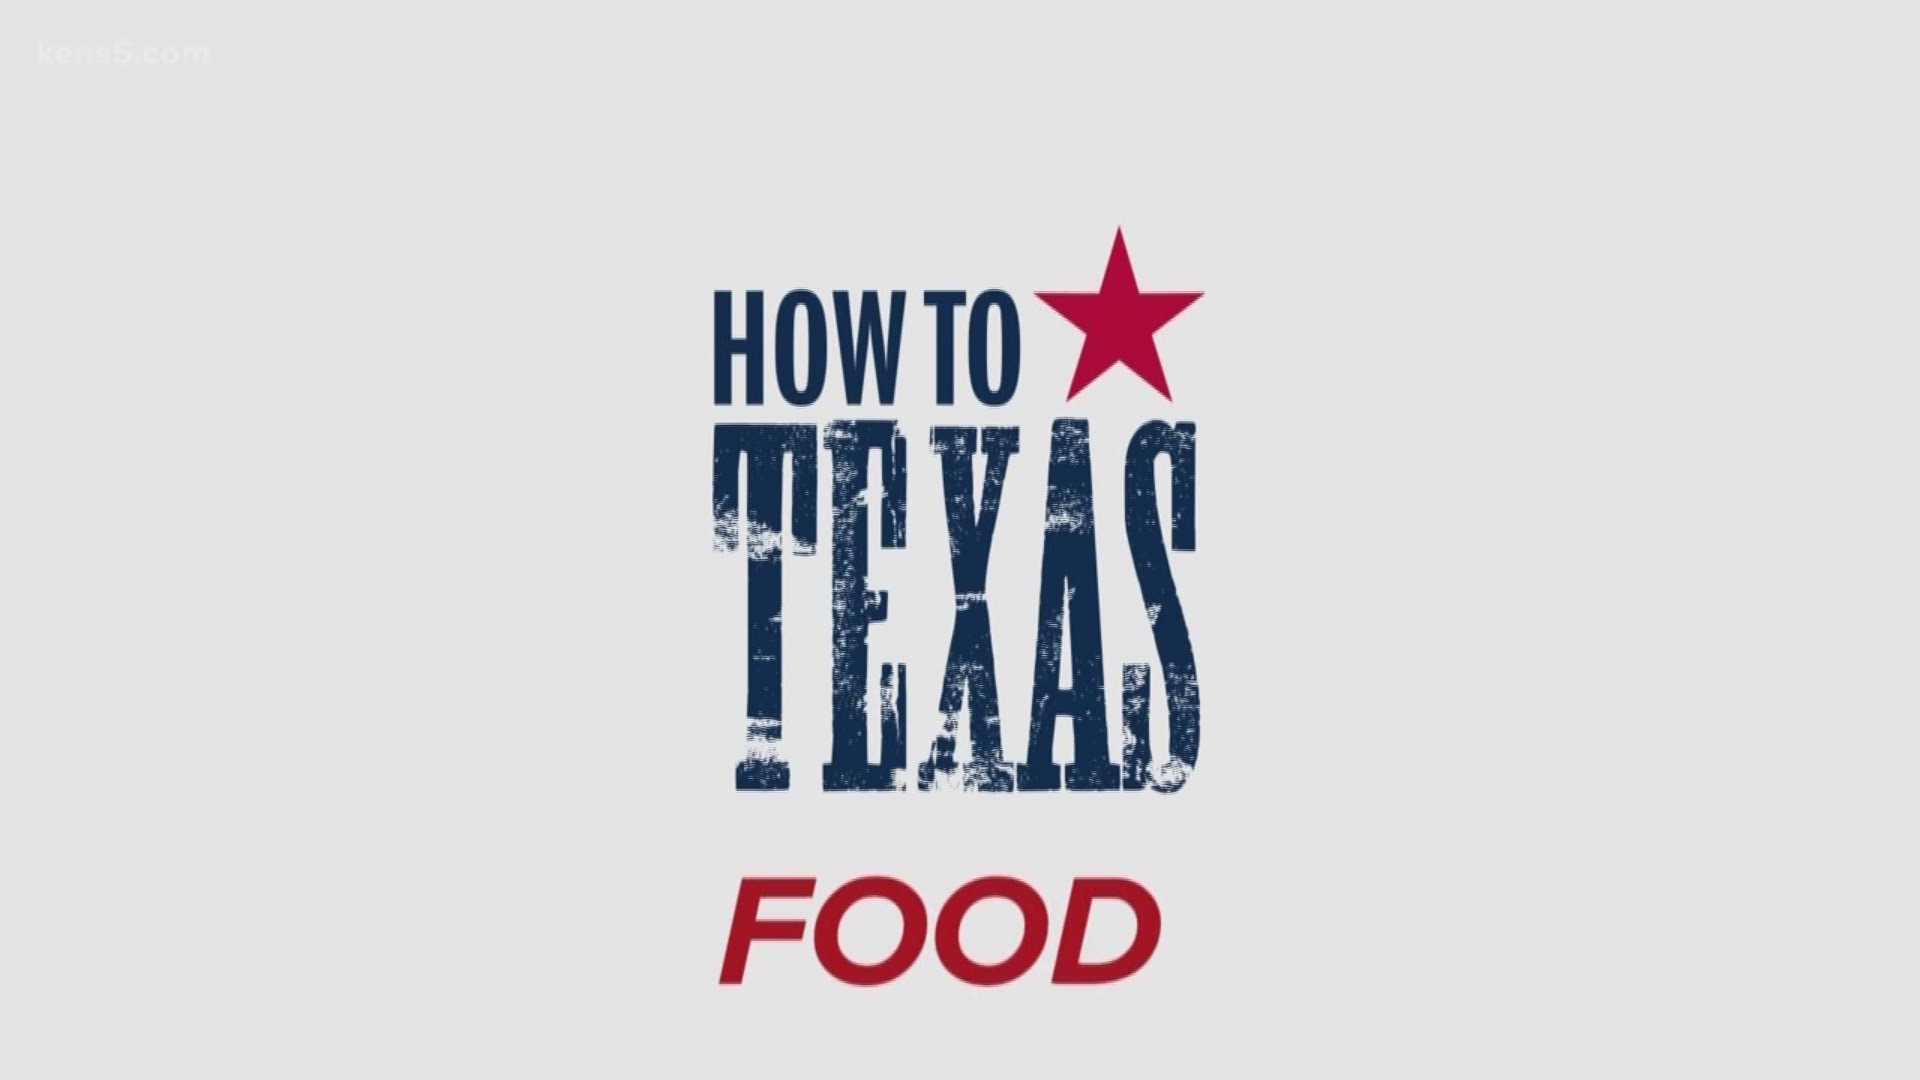 From Tex Mex to Barbecue to unique pies; we're taking you on a tour of Texas foods. Digital journalist Lexi Hazlett shows you how it's done in the Lone Star State.